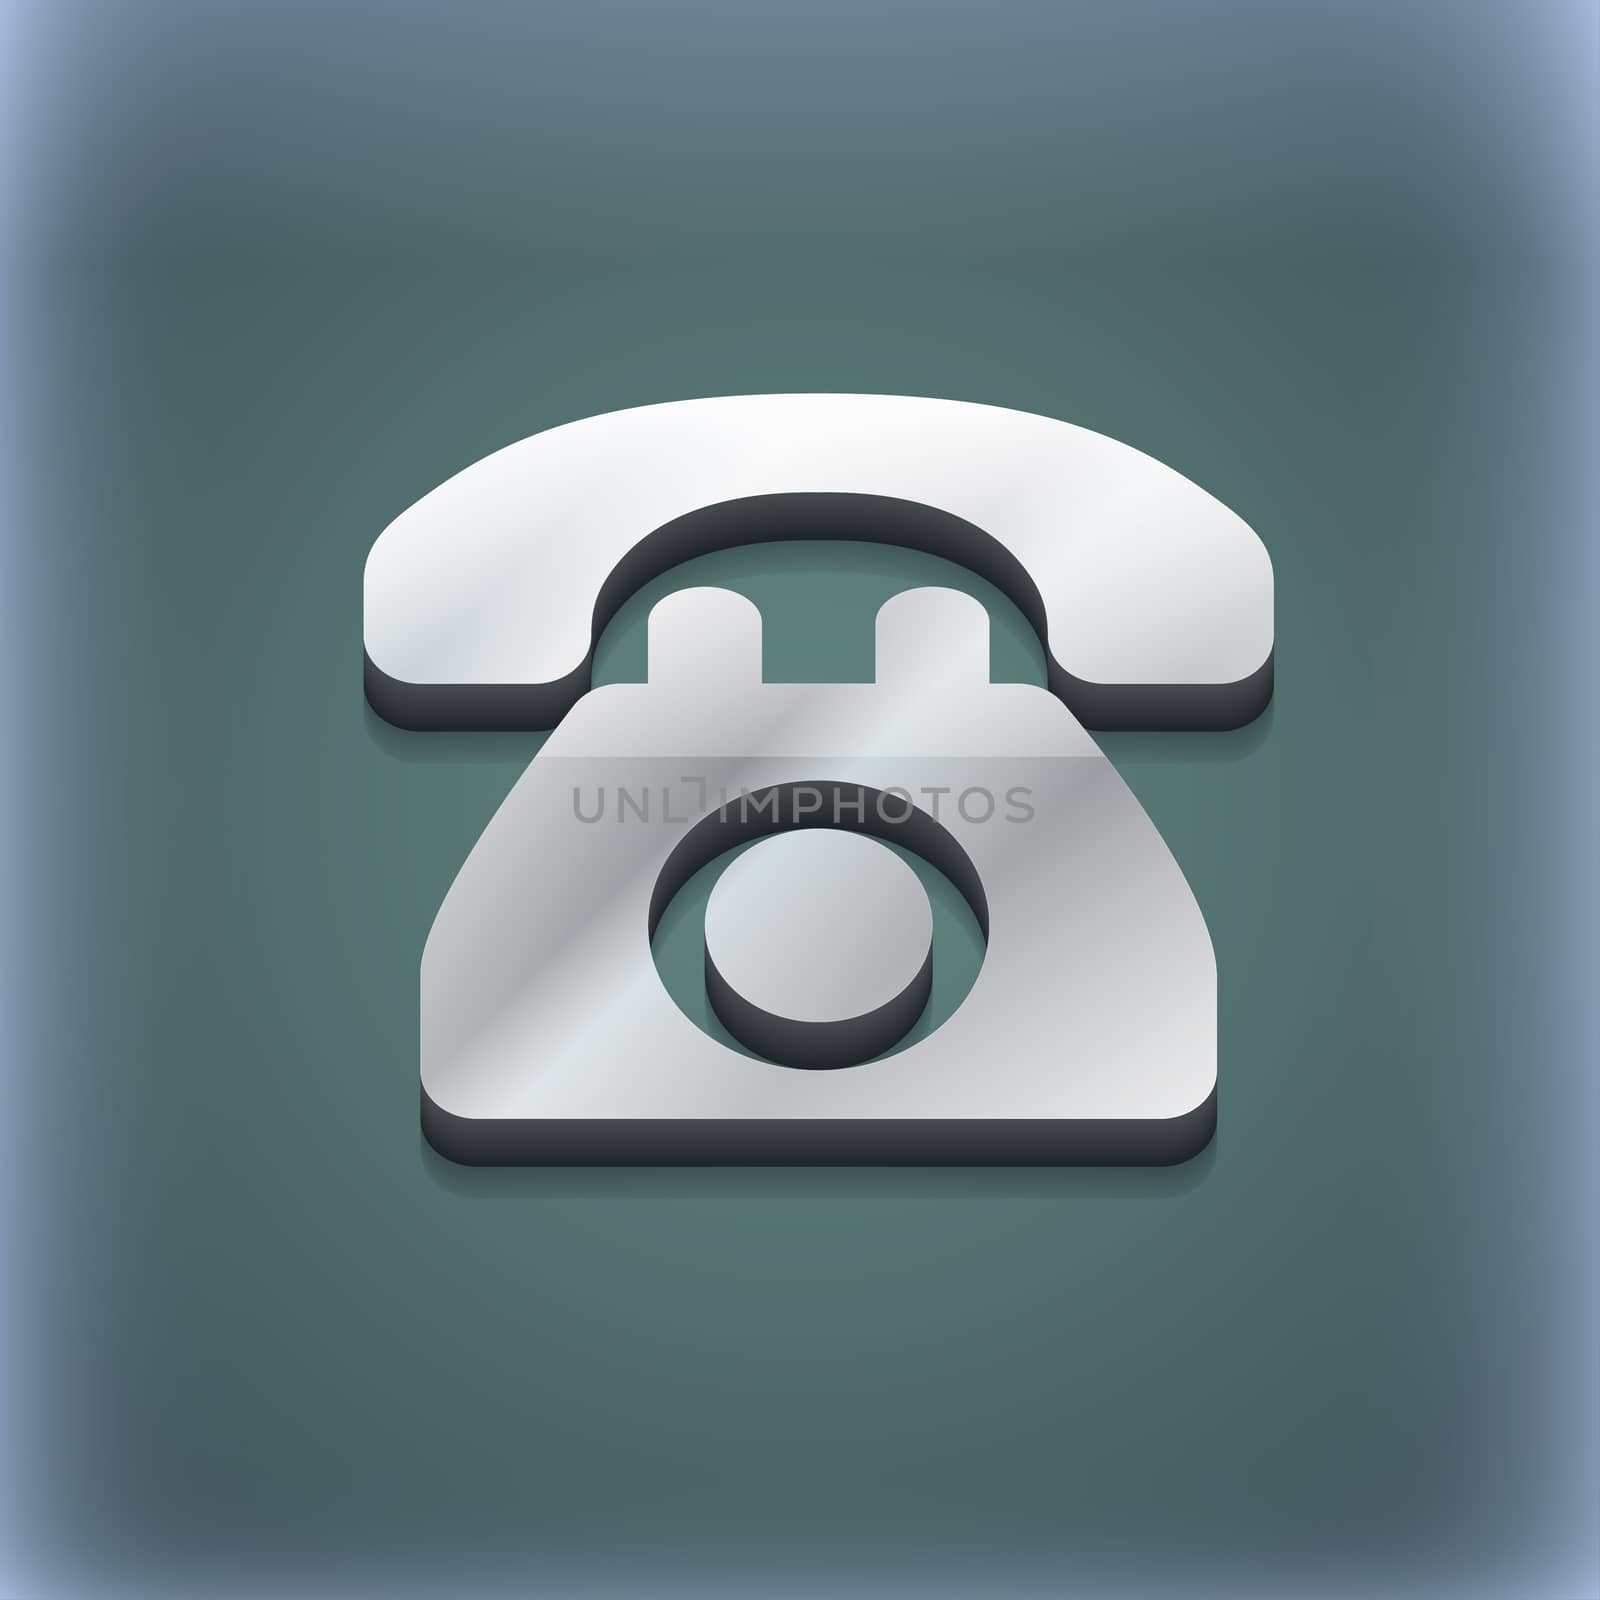 Retro telephone icon symbol. 3D style. Trendy, modern design with space for your text illustration. Raster version